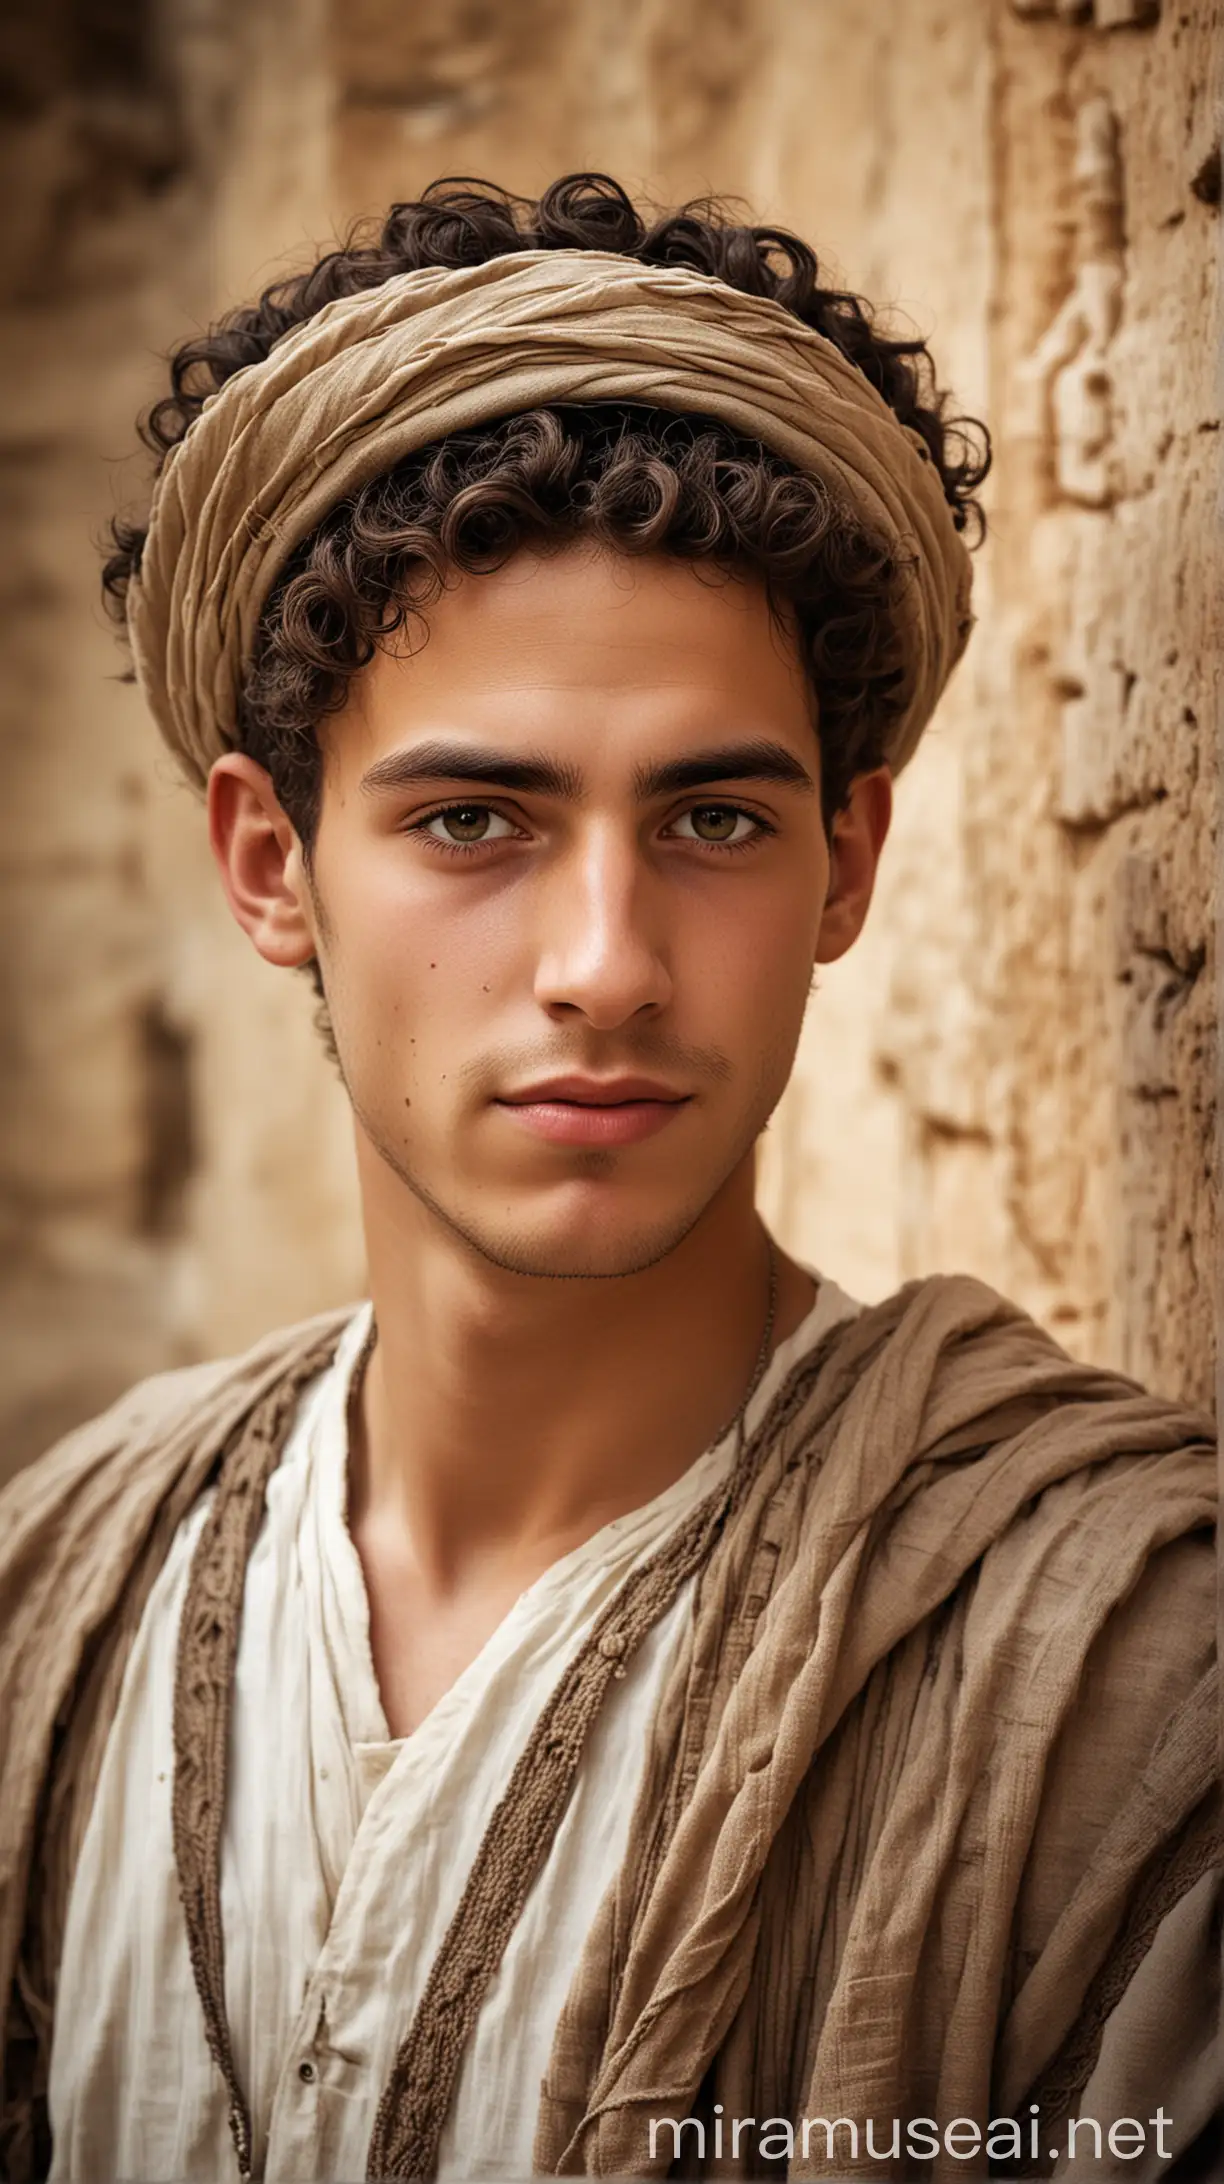 Young Jewish Man in Ancient World Standing by Temple Wall